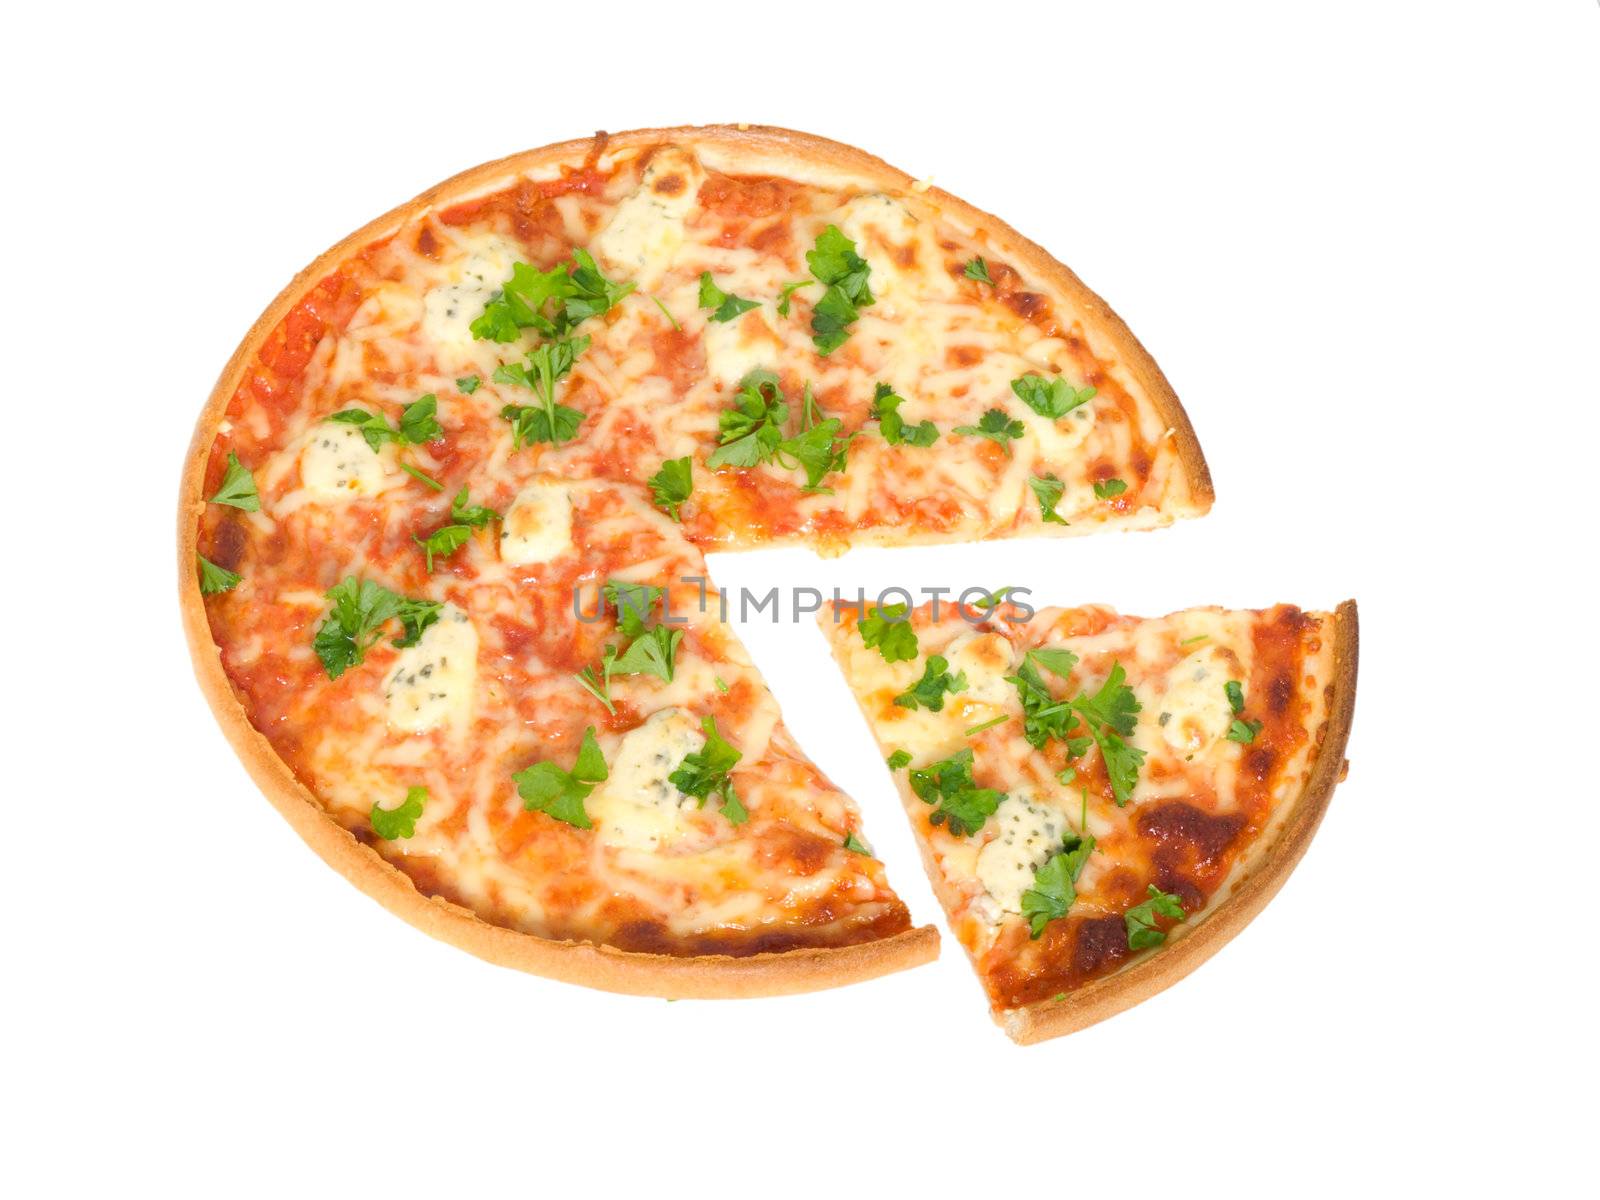  Pizza on white background  